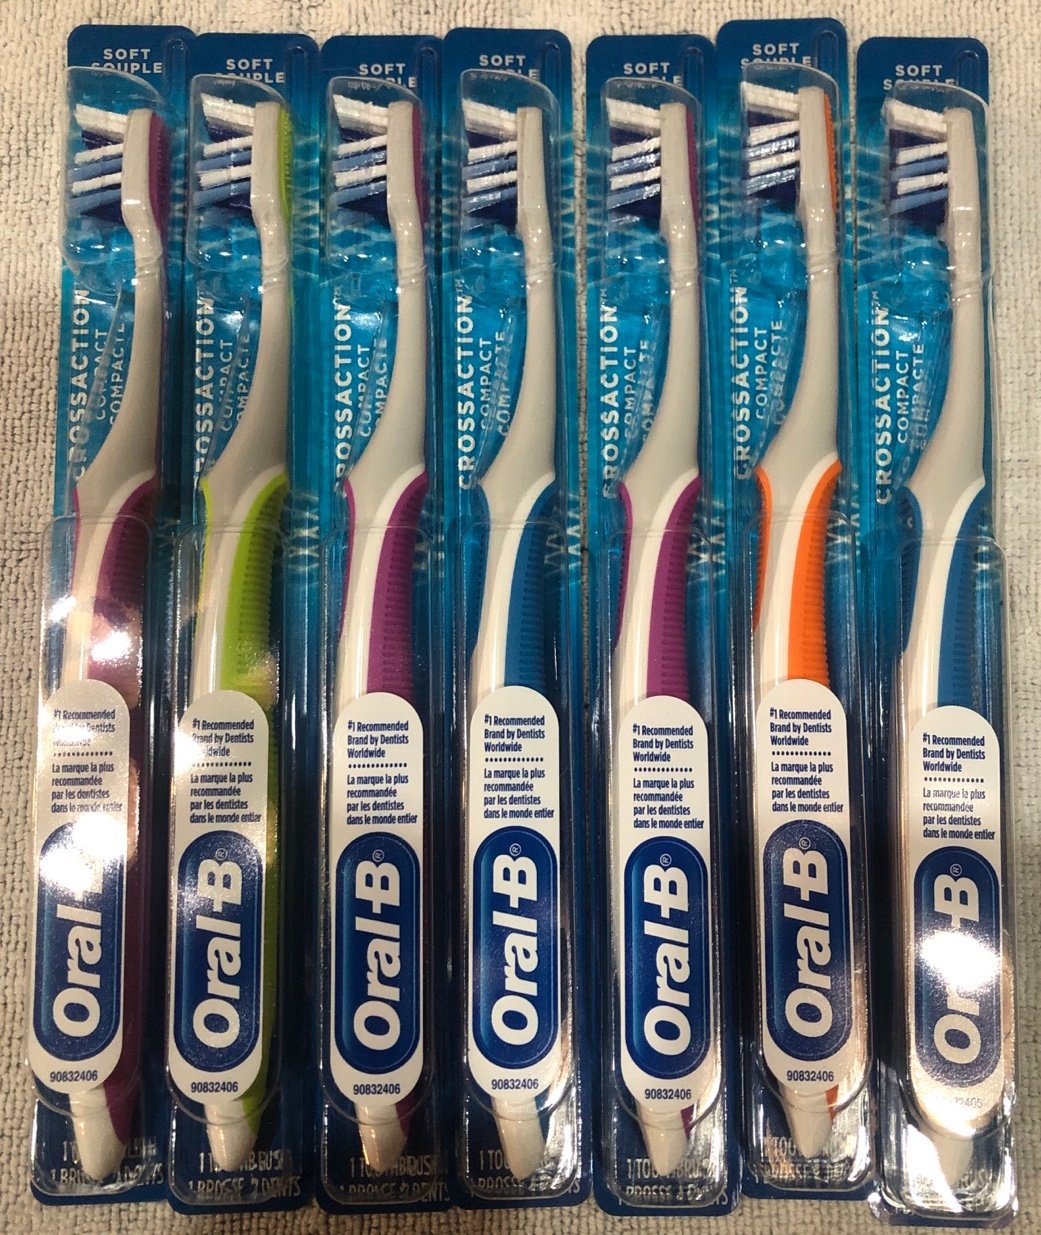 7 Oral-B Cross Action Compact Manual Toothbrush New in Package Assorted Colors kkkfiQf8K